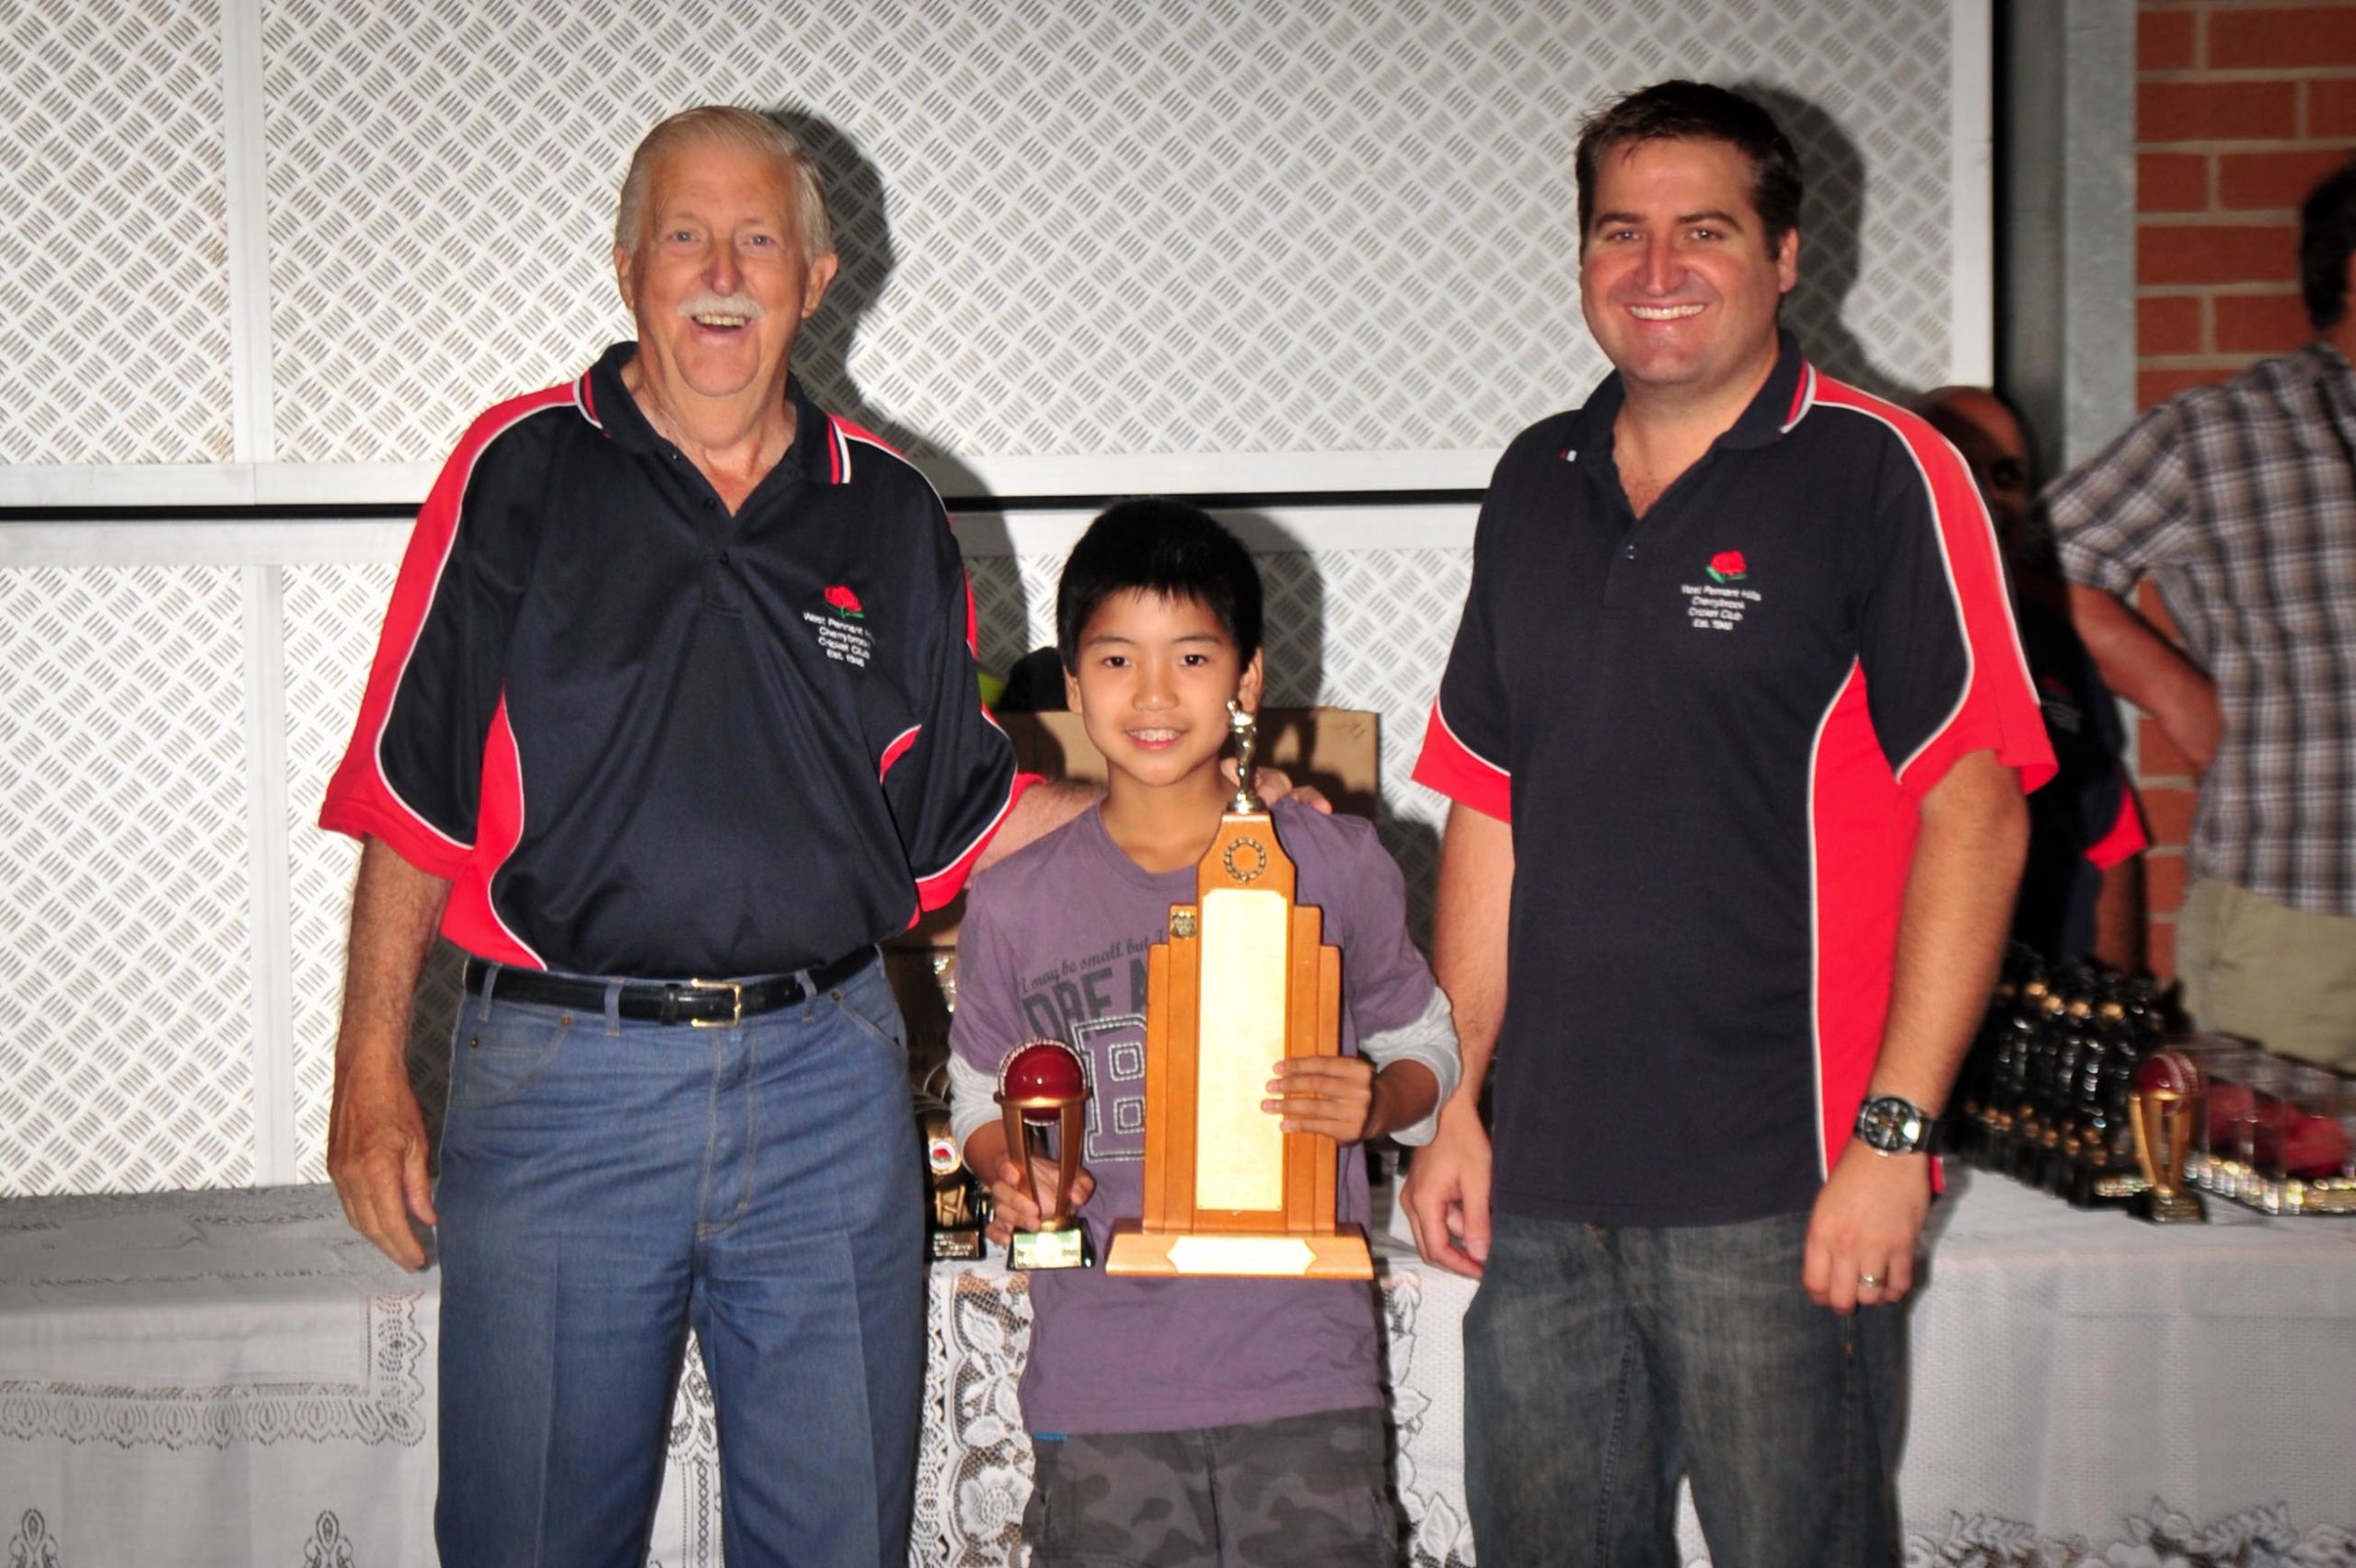 Adam Tan receiving the Charles Booth Memorial Trophy (2011/12) from Barry McDonald (left) and Glenn O'Connor